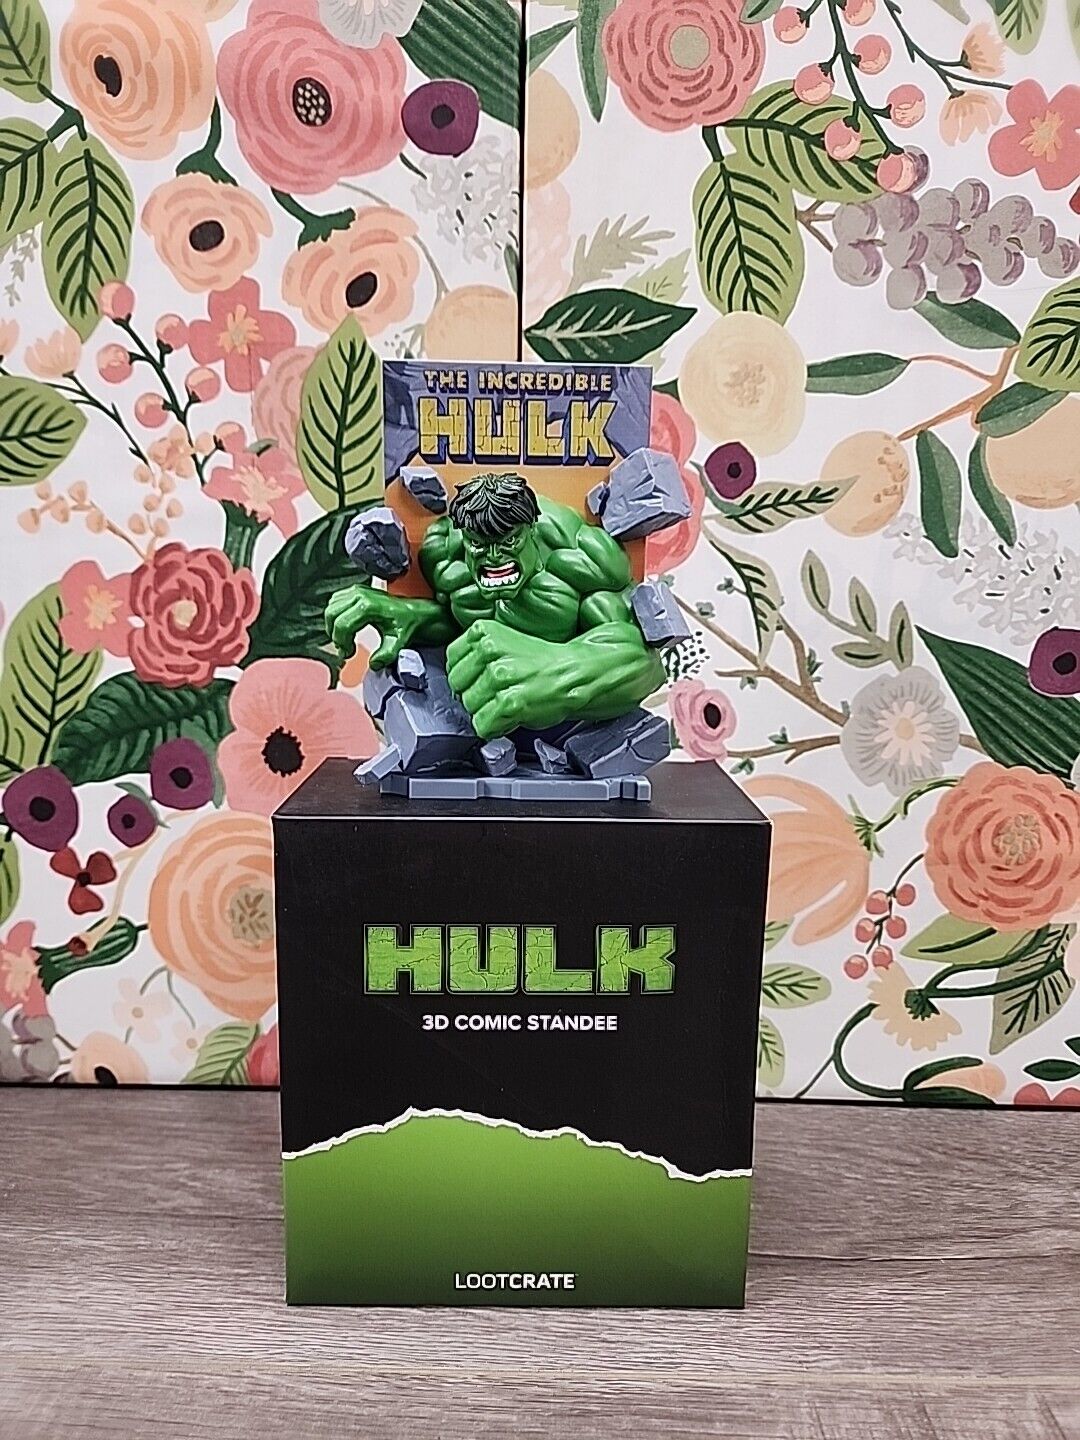 Marvel The Incredible HULK 3D Comic Standee Loot Crate Collectible - New 